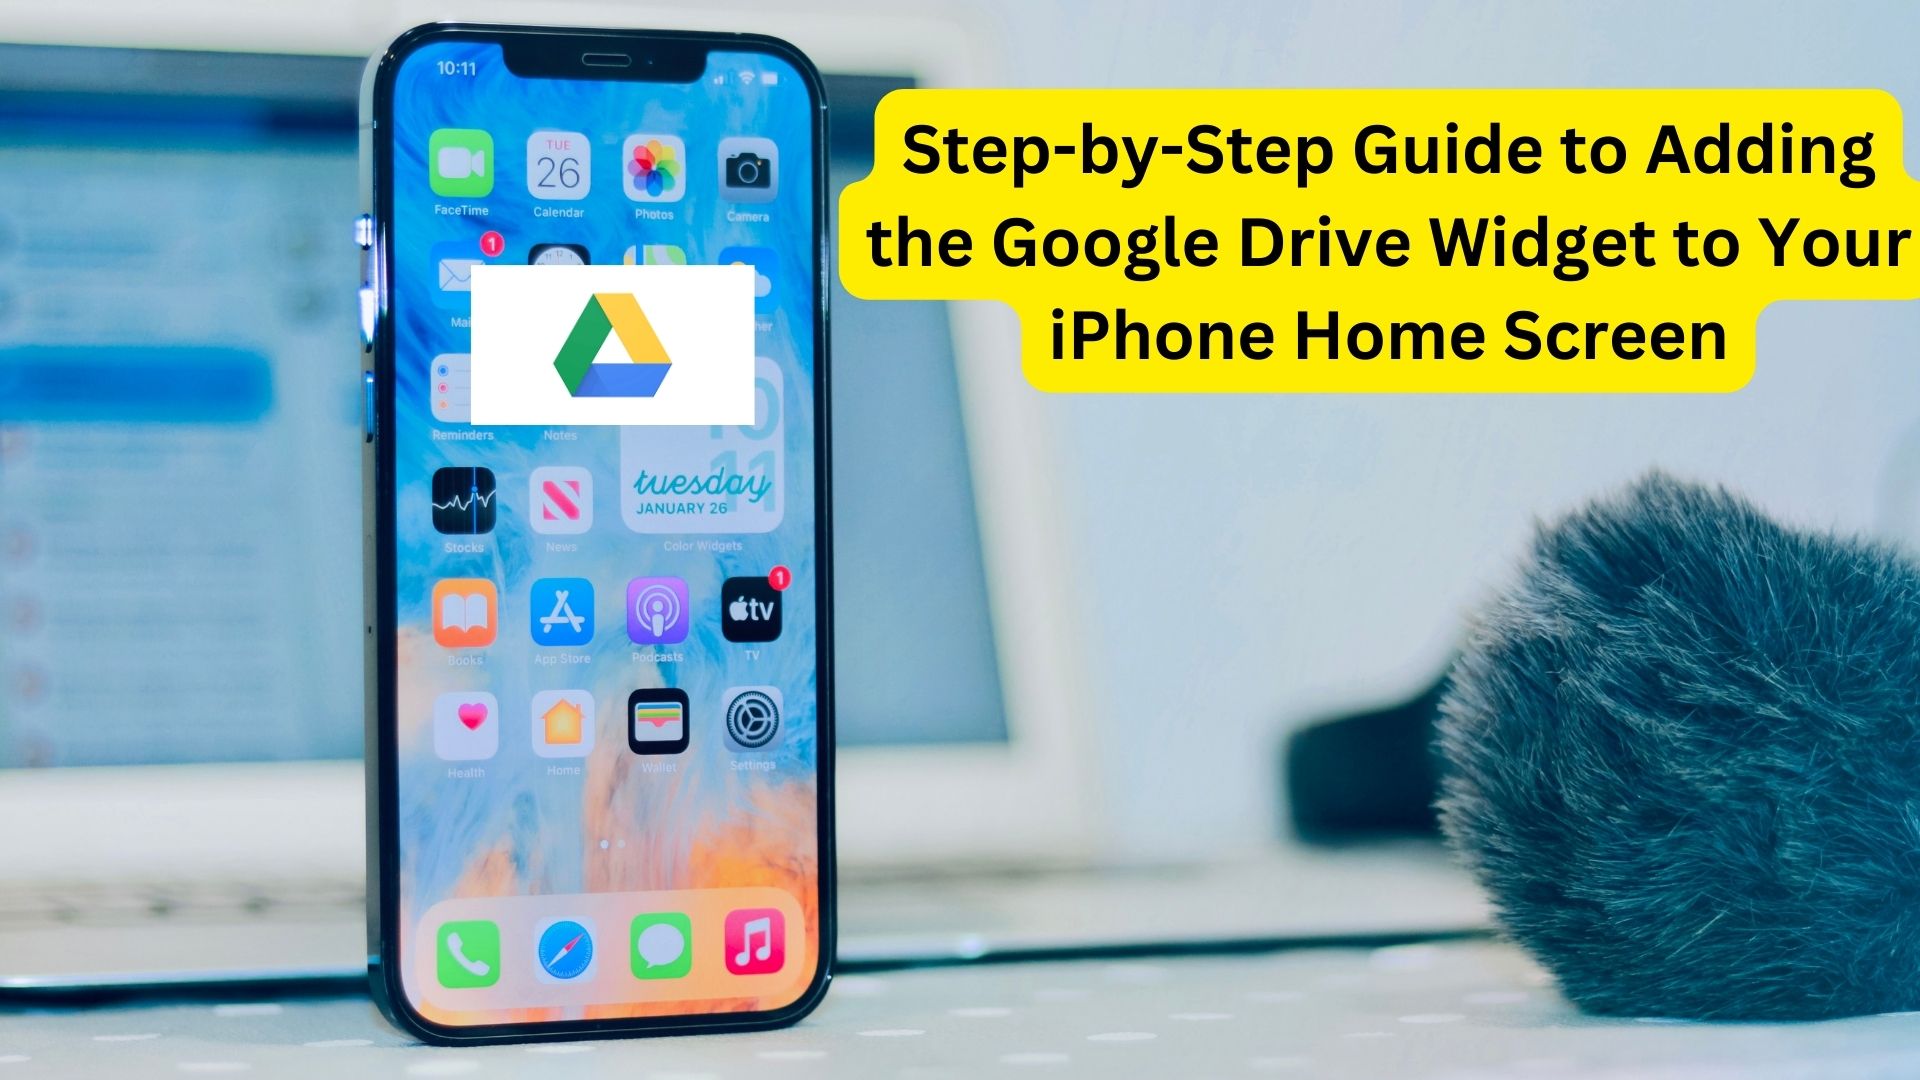 Step-by-Step Guide to Adding the Google Drive Widget to Your iPhone Home Screen